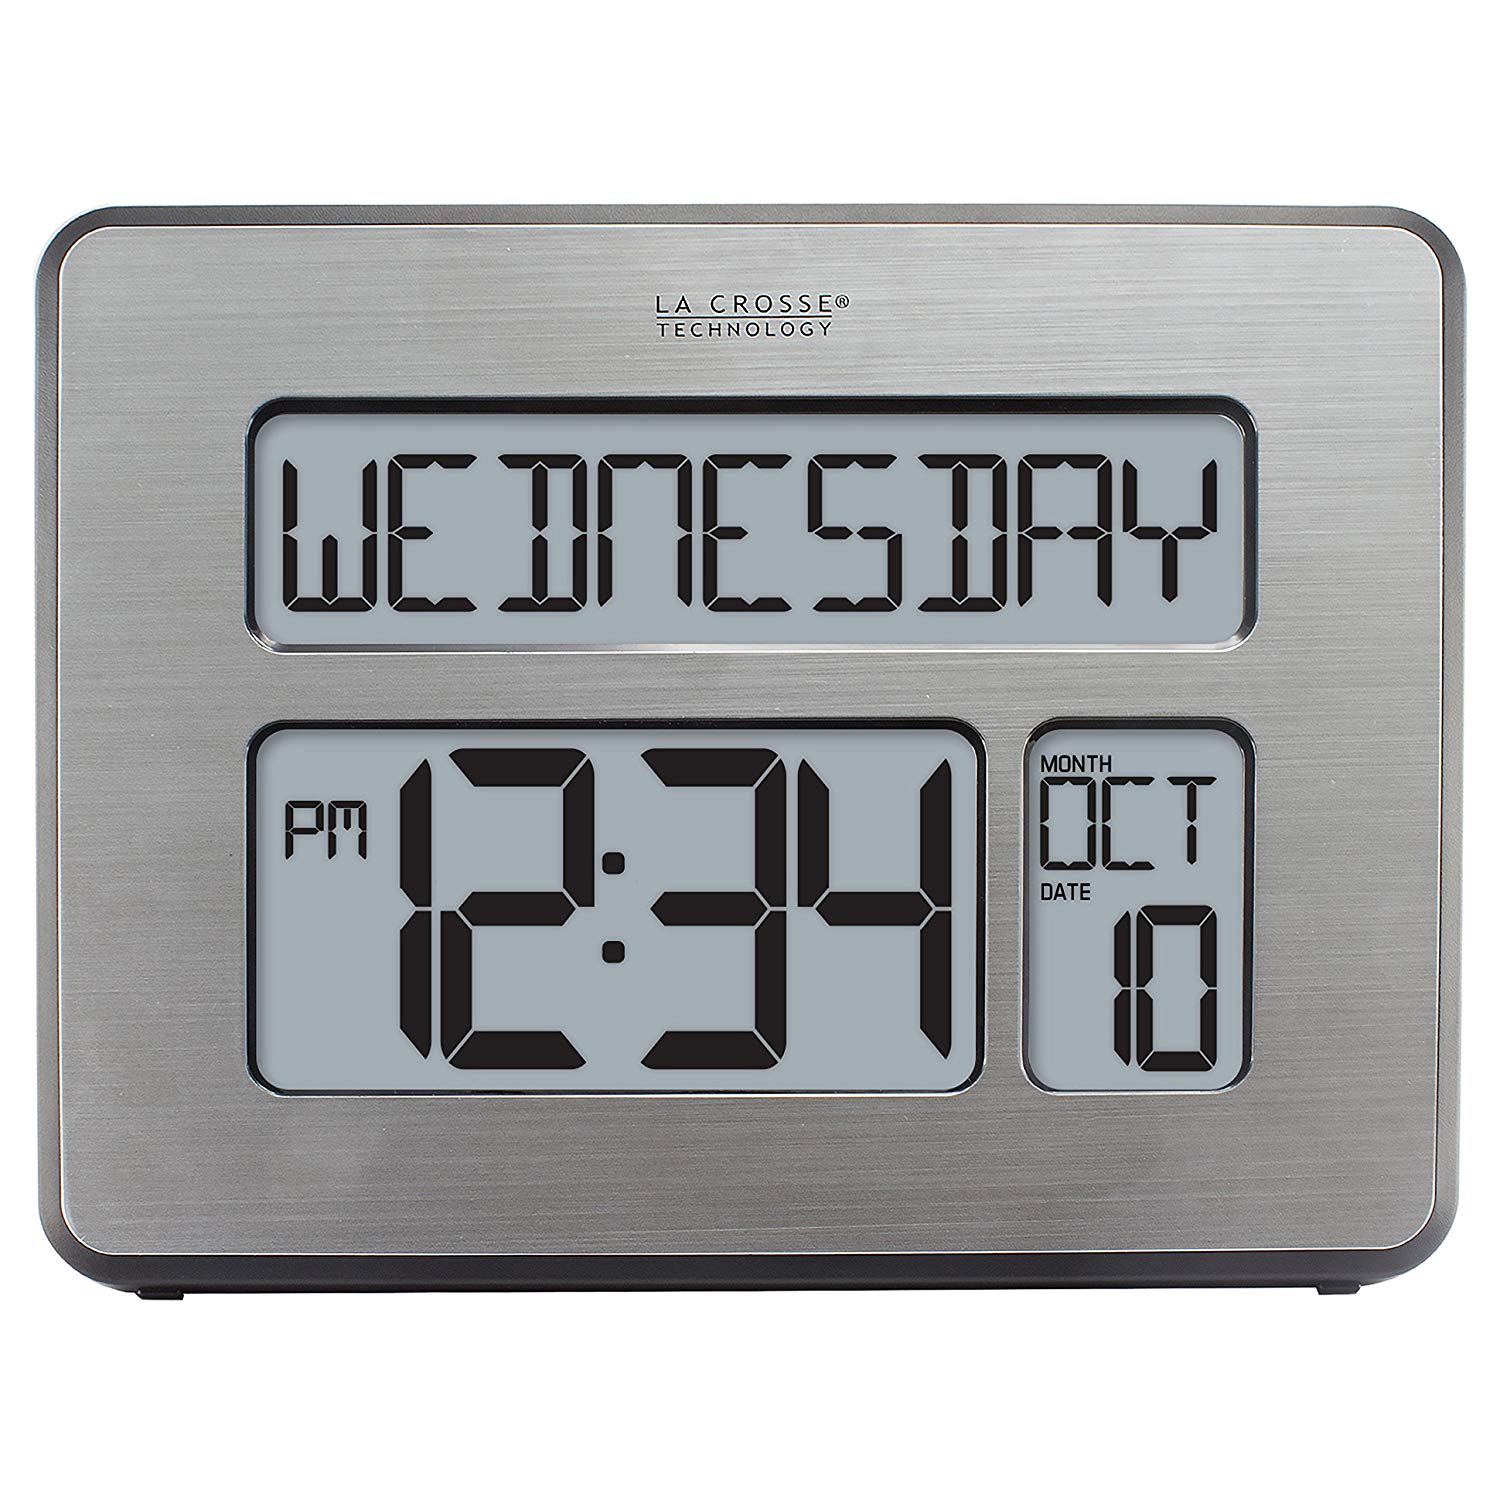 La Crosse Technology C86279 Atomic Full Calendar Clock with Extra Large Digits for The Elderly